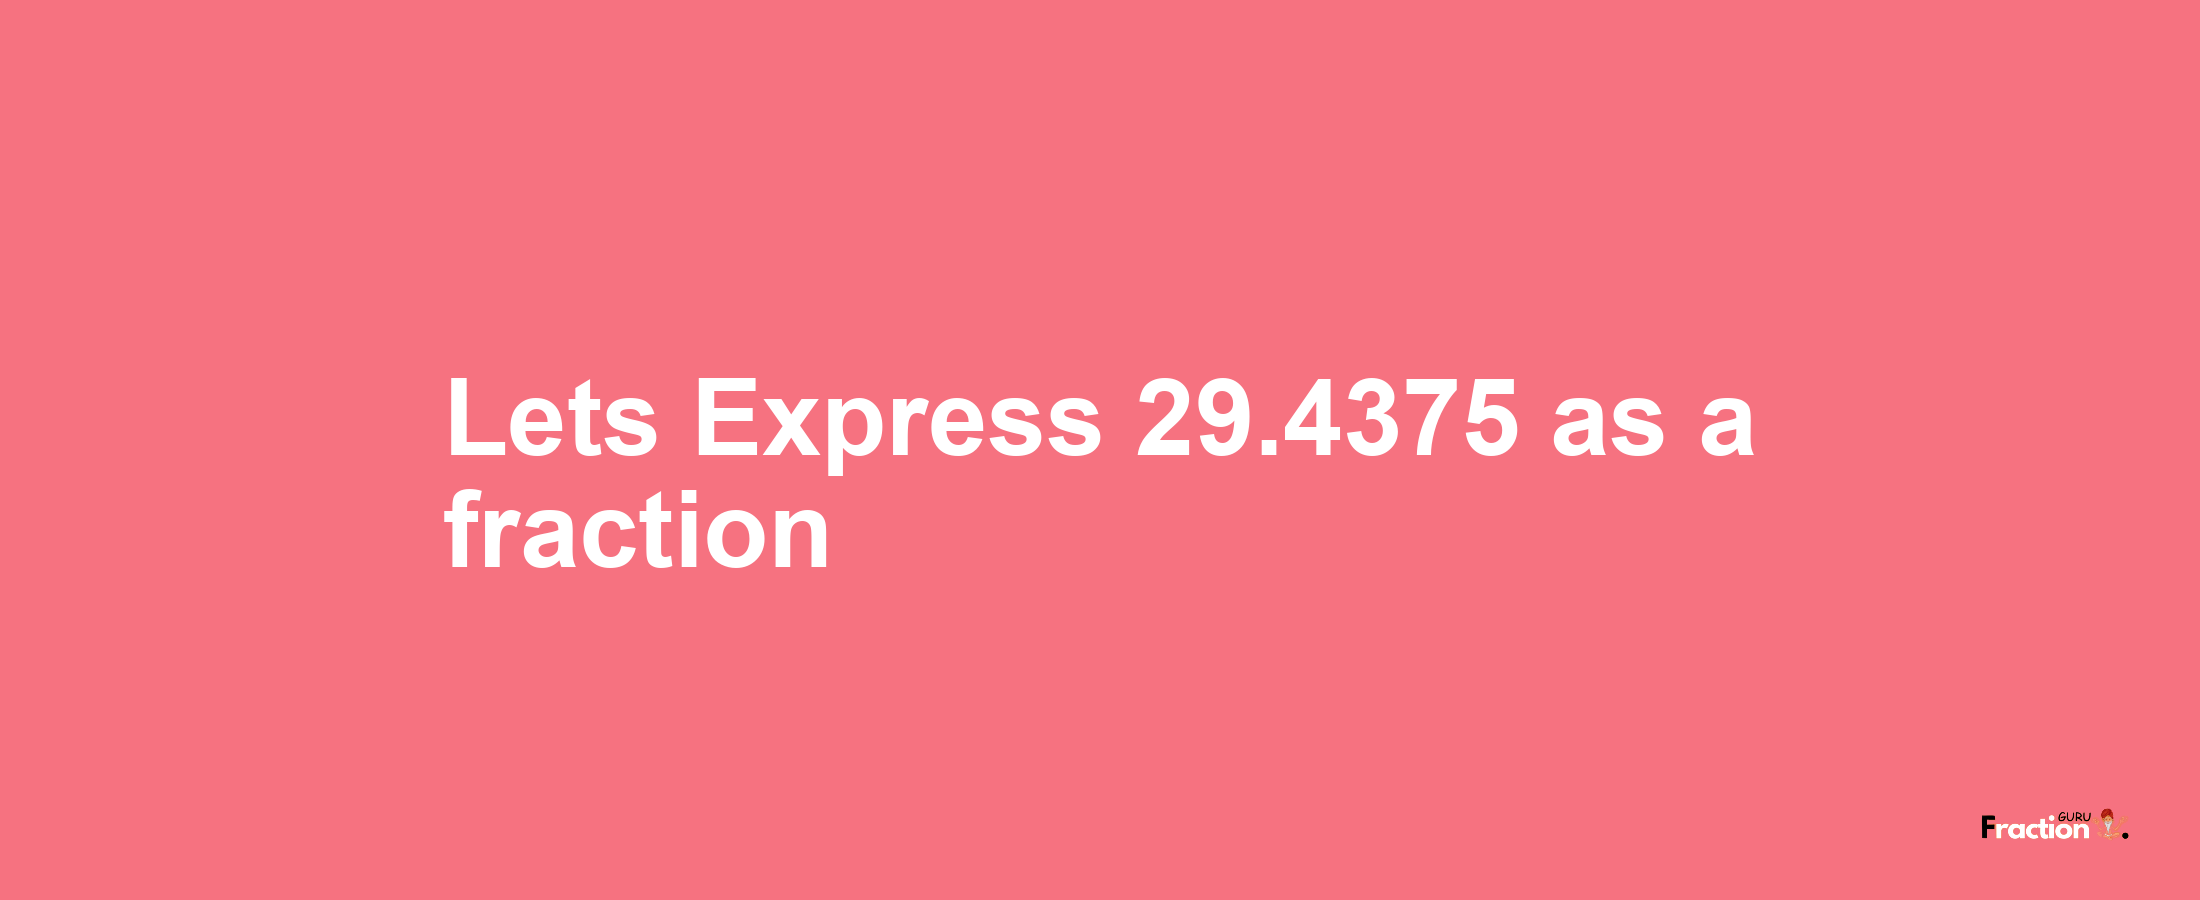 Lets Express 29.4375 as afraction